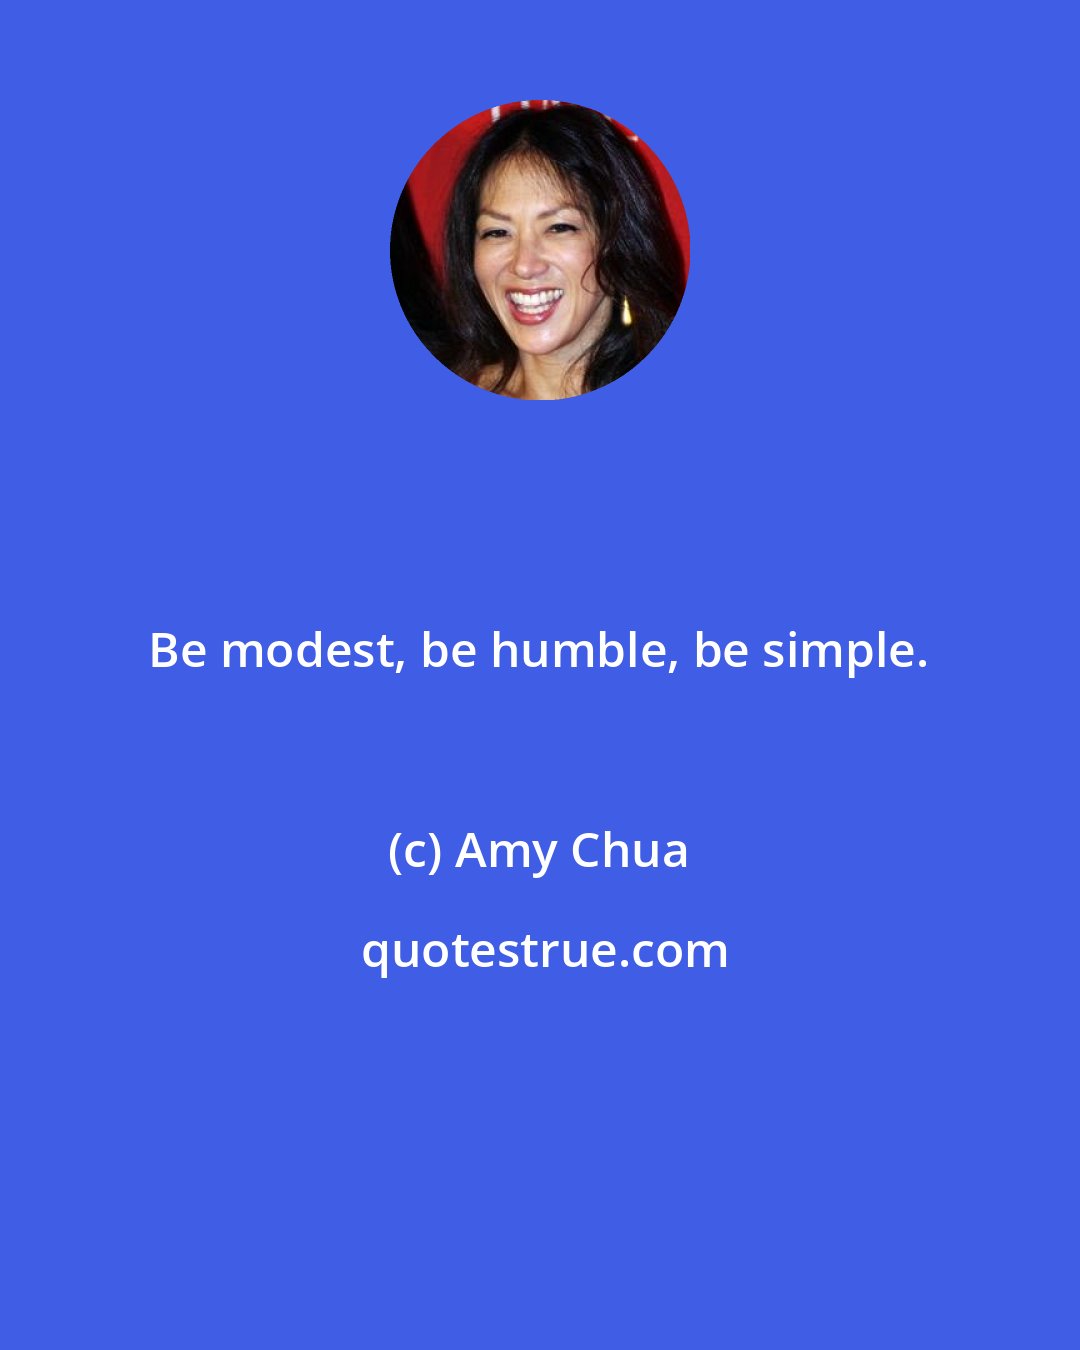 Amy Chua: Be modest, be humble, be simple.